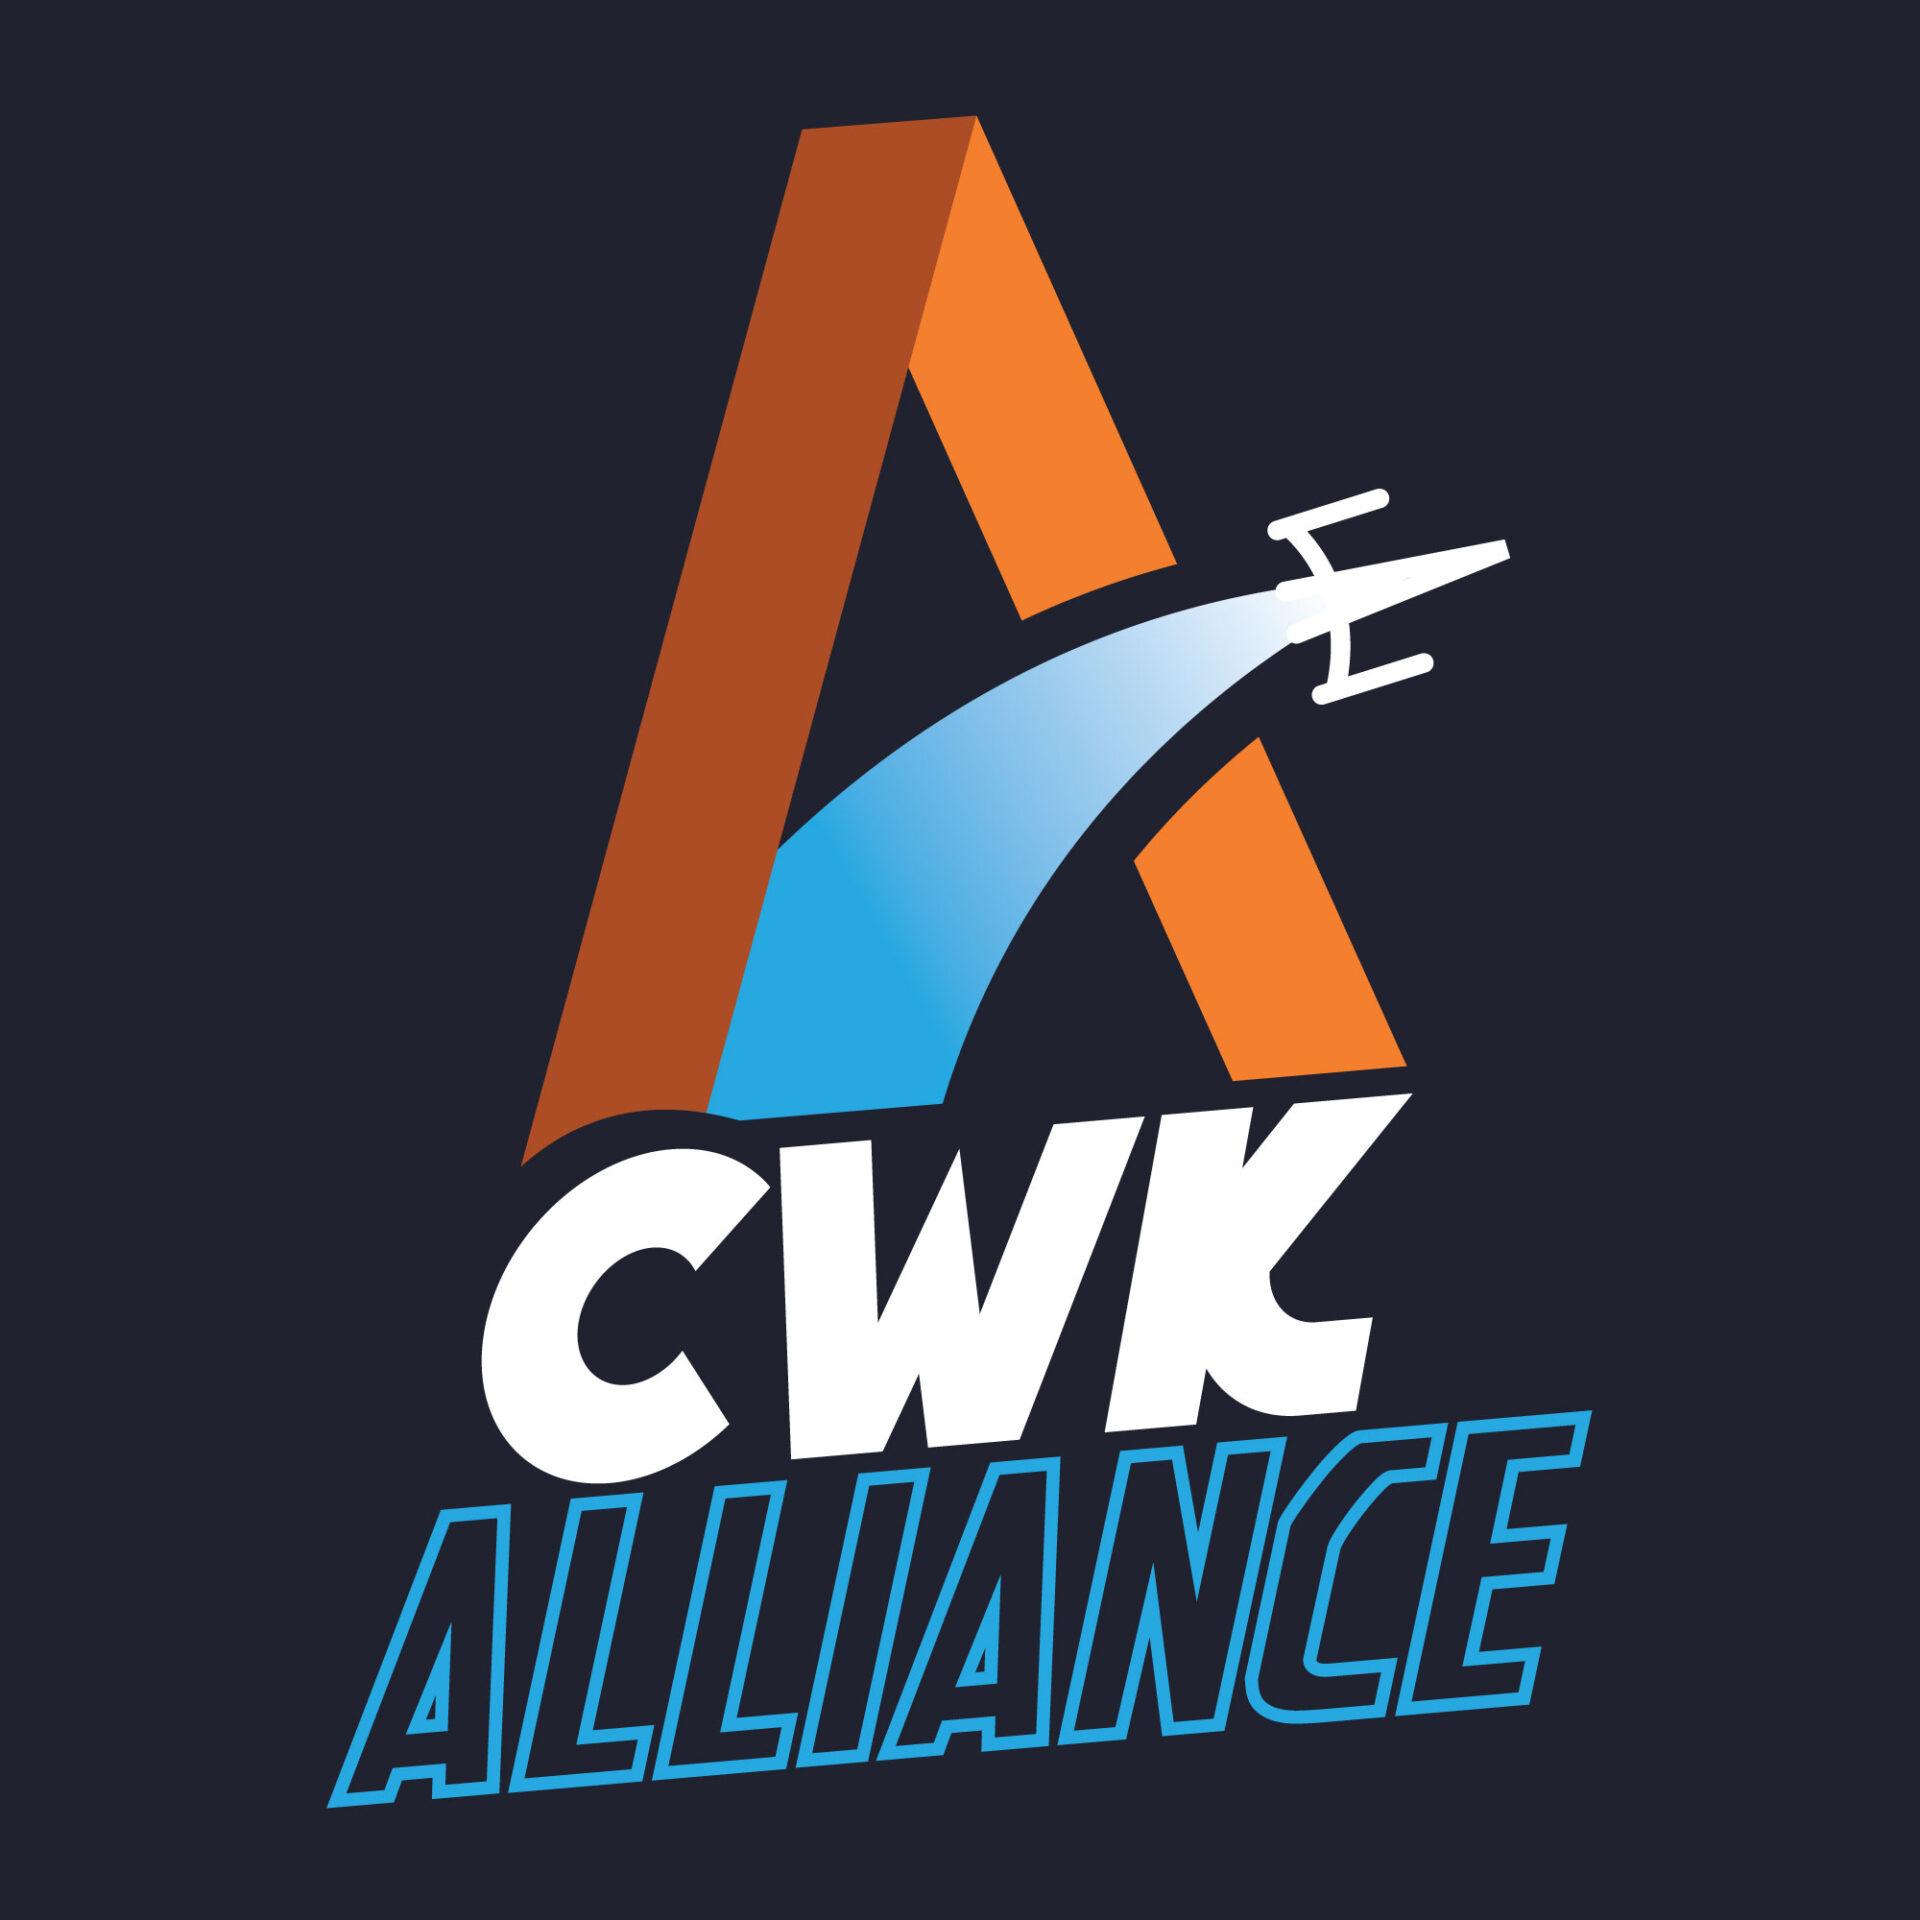 Join the CWK Alliance!